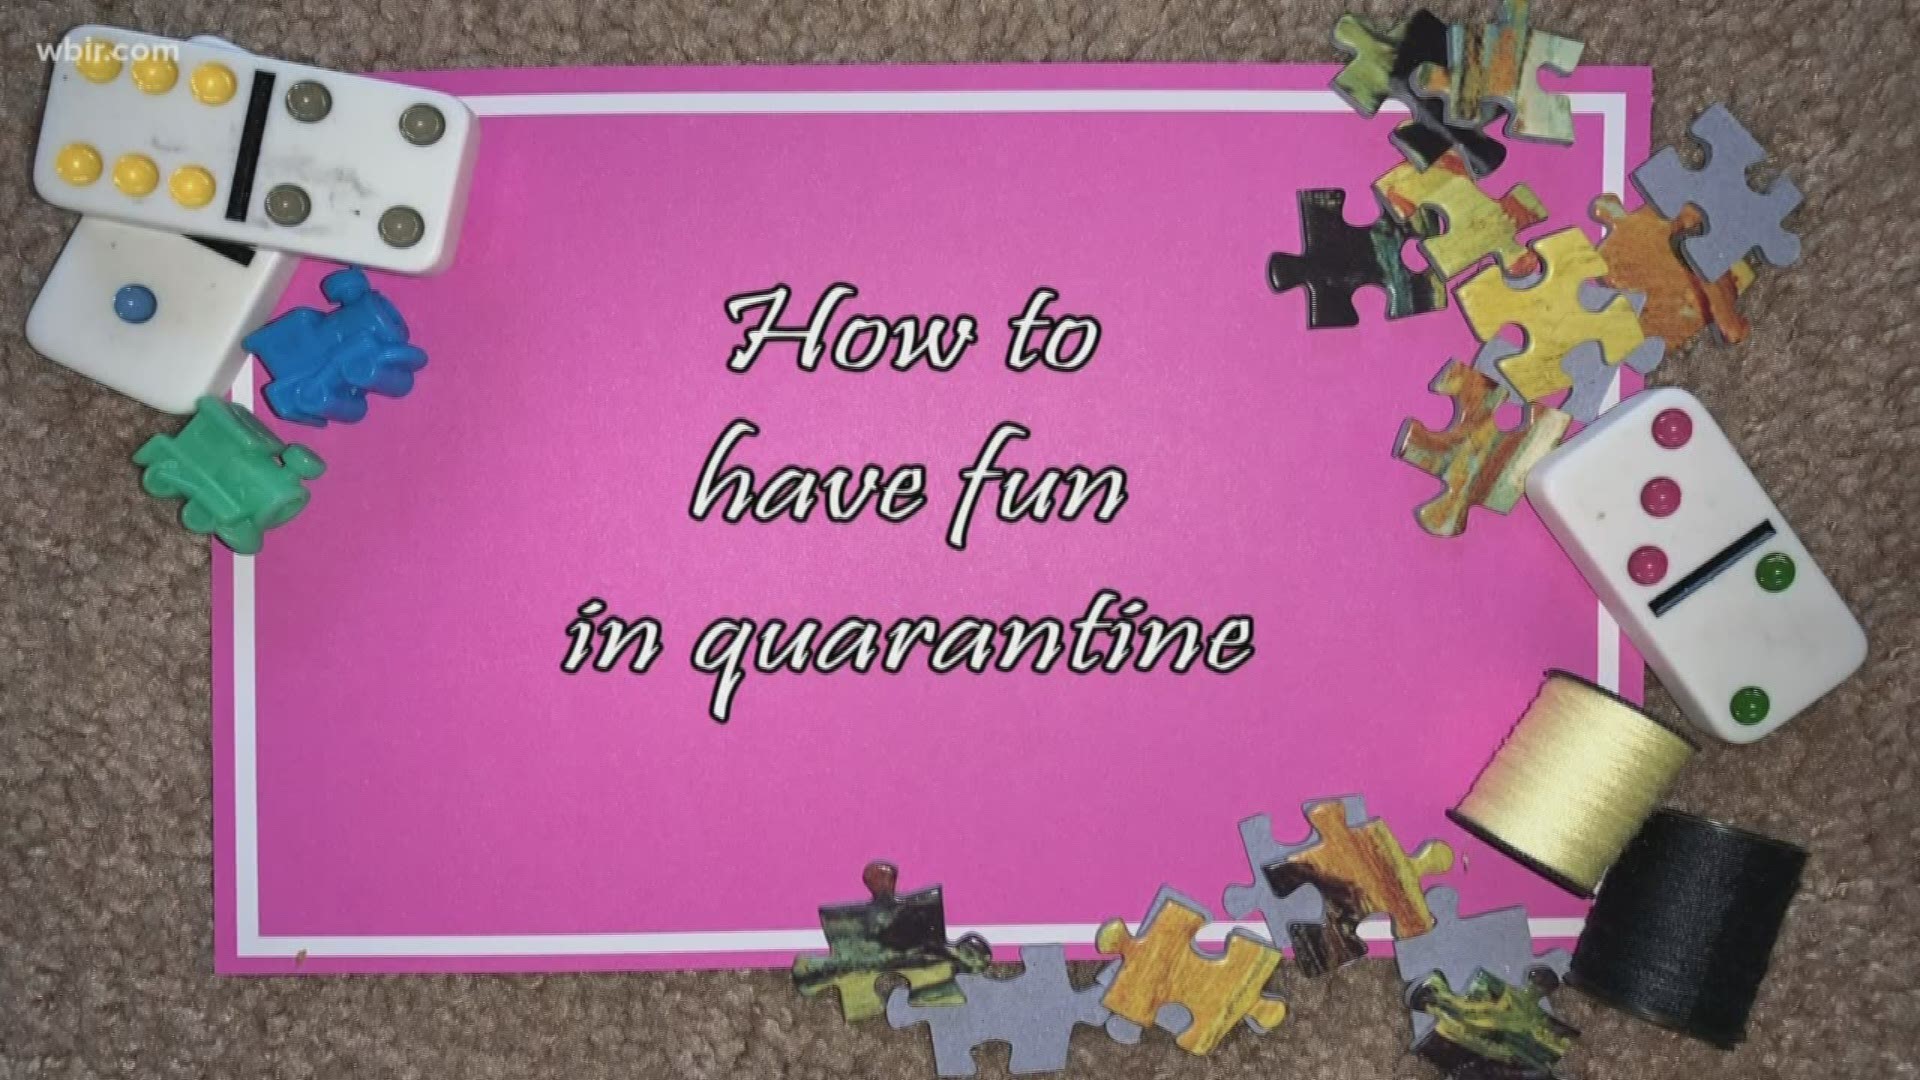 Here are some new ideas on how to have fun at home, if you're cooped up in quarantine.